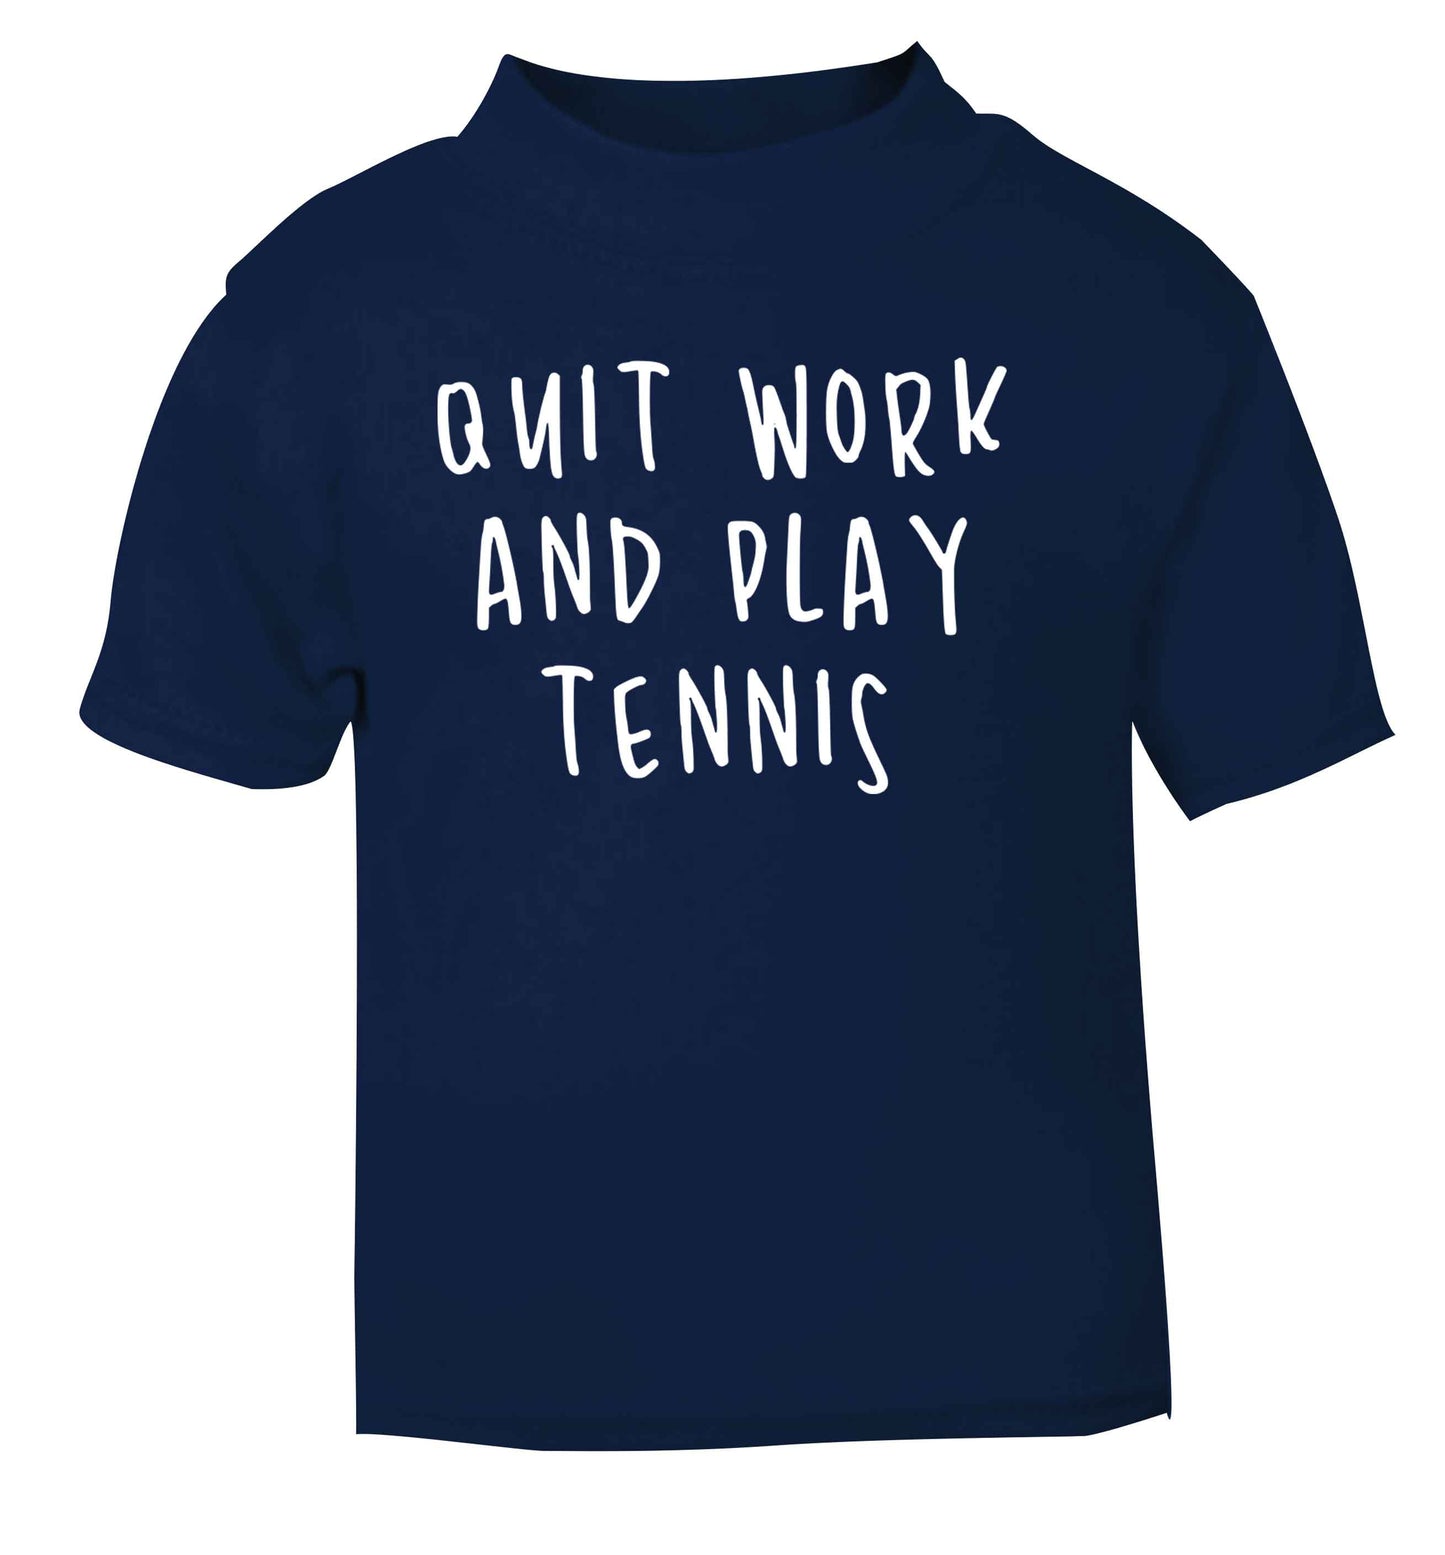 Quit work and play tennis navy Baby Toddler Tshirt 2 Years